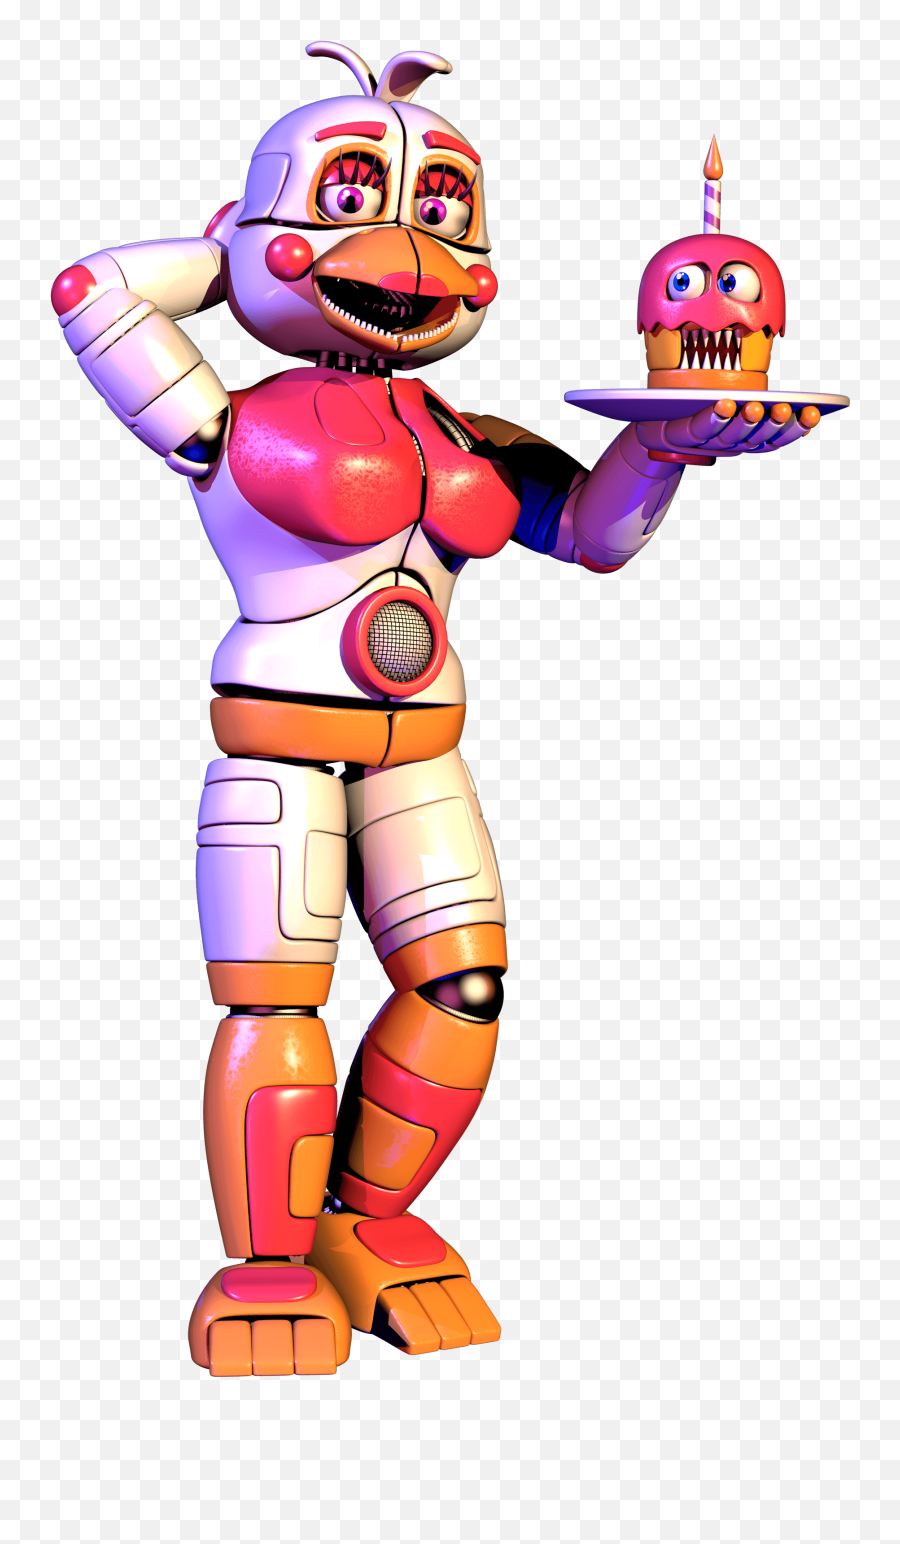 Funtime Chica Wallpapers - Wallpaper Cave Toy Chica Fanart Png,Chica Icon